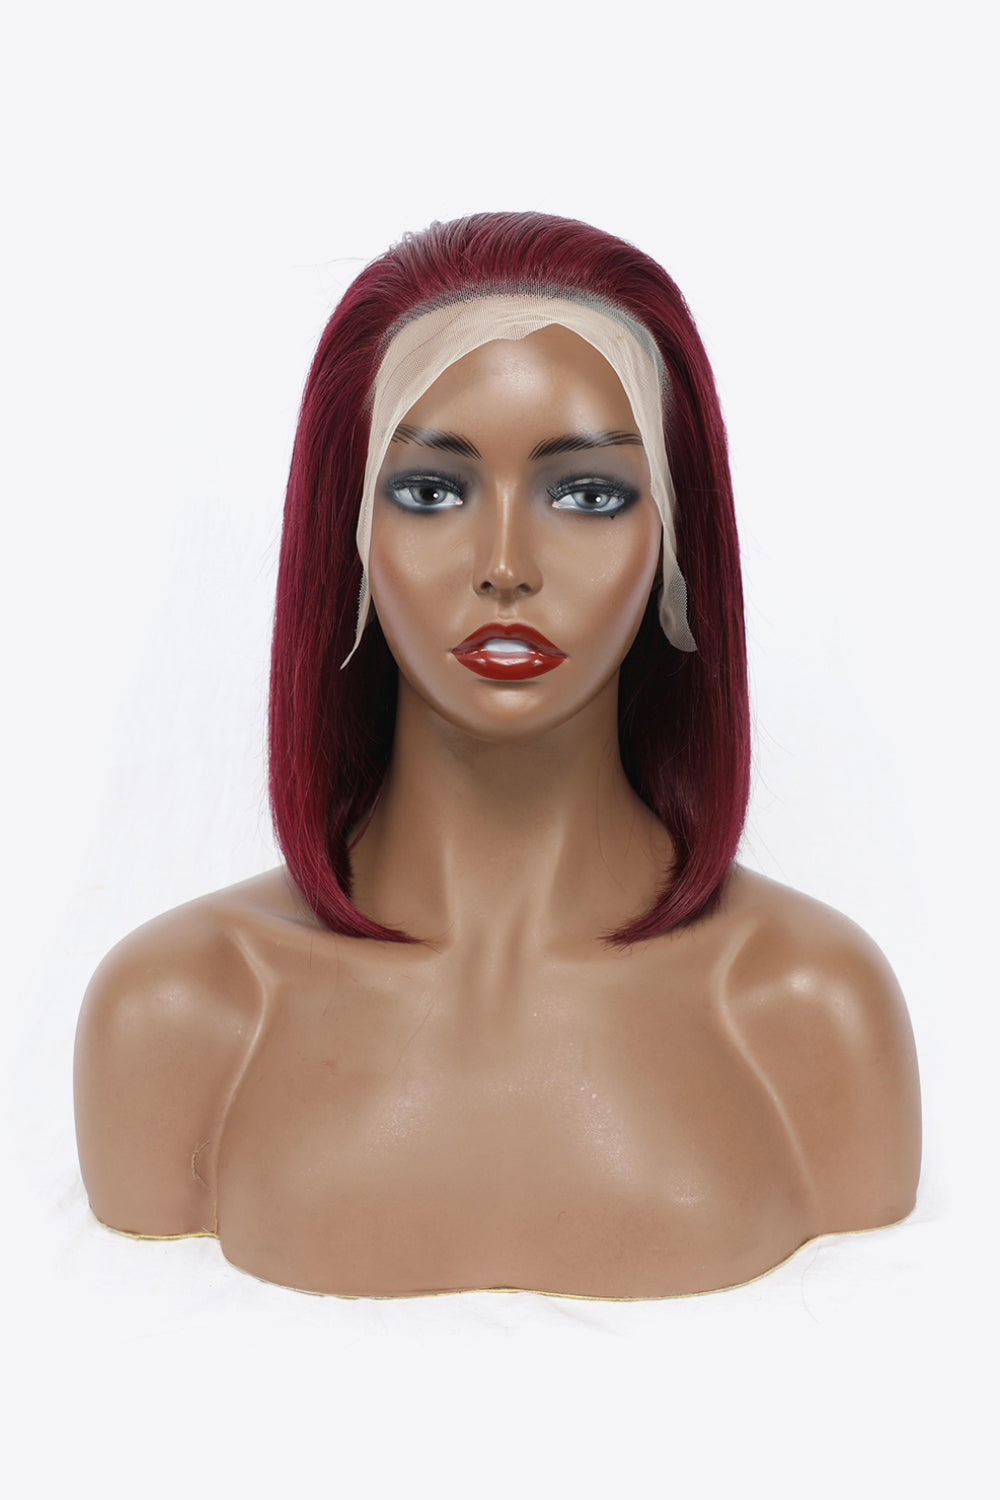 HUMAN HAIR 12" Red 155g Lace Front Wig Thick 150% Density Shoulder Length Bob